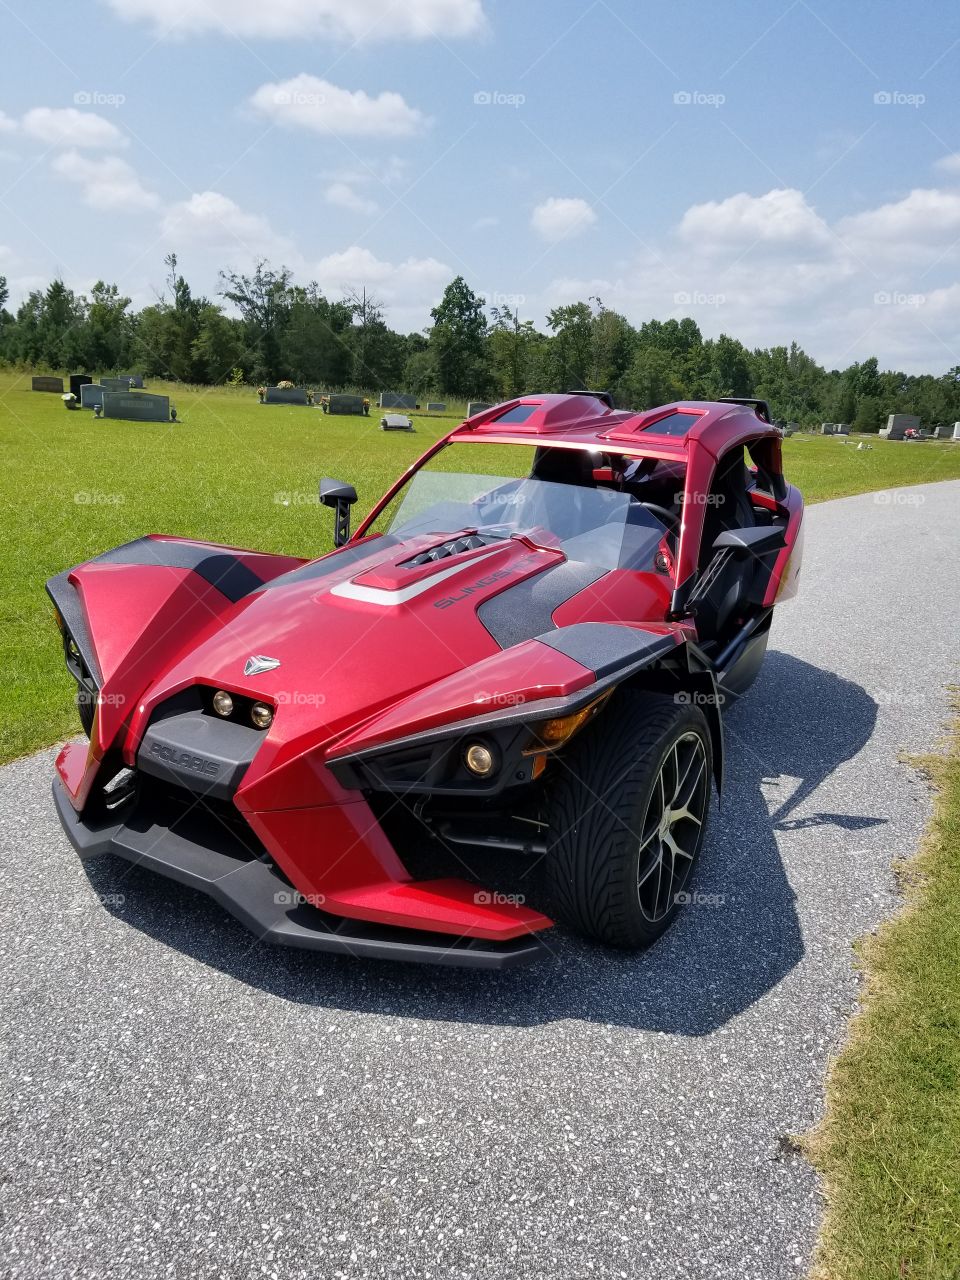 This is a modified polaris slingshot. its sitting at a church, in the back ground pretty green nature with trees.